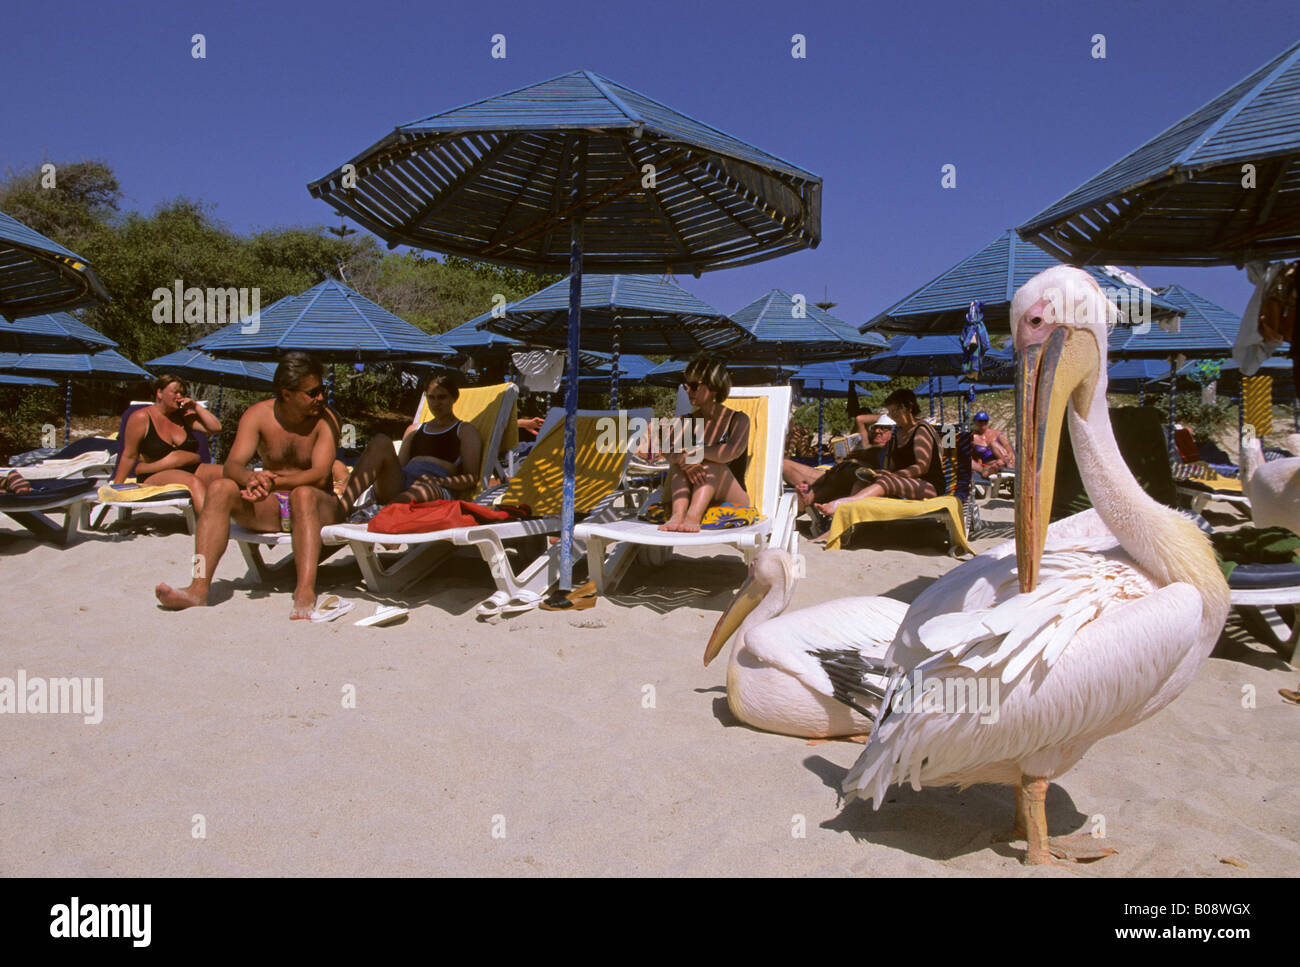 Two pelicans (Pelecanidae) grooming and lying on the Agia Napa beach in front of blue wooden shade umbrellas, Cyprus Stock Photo